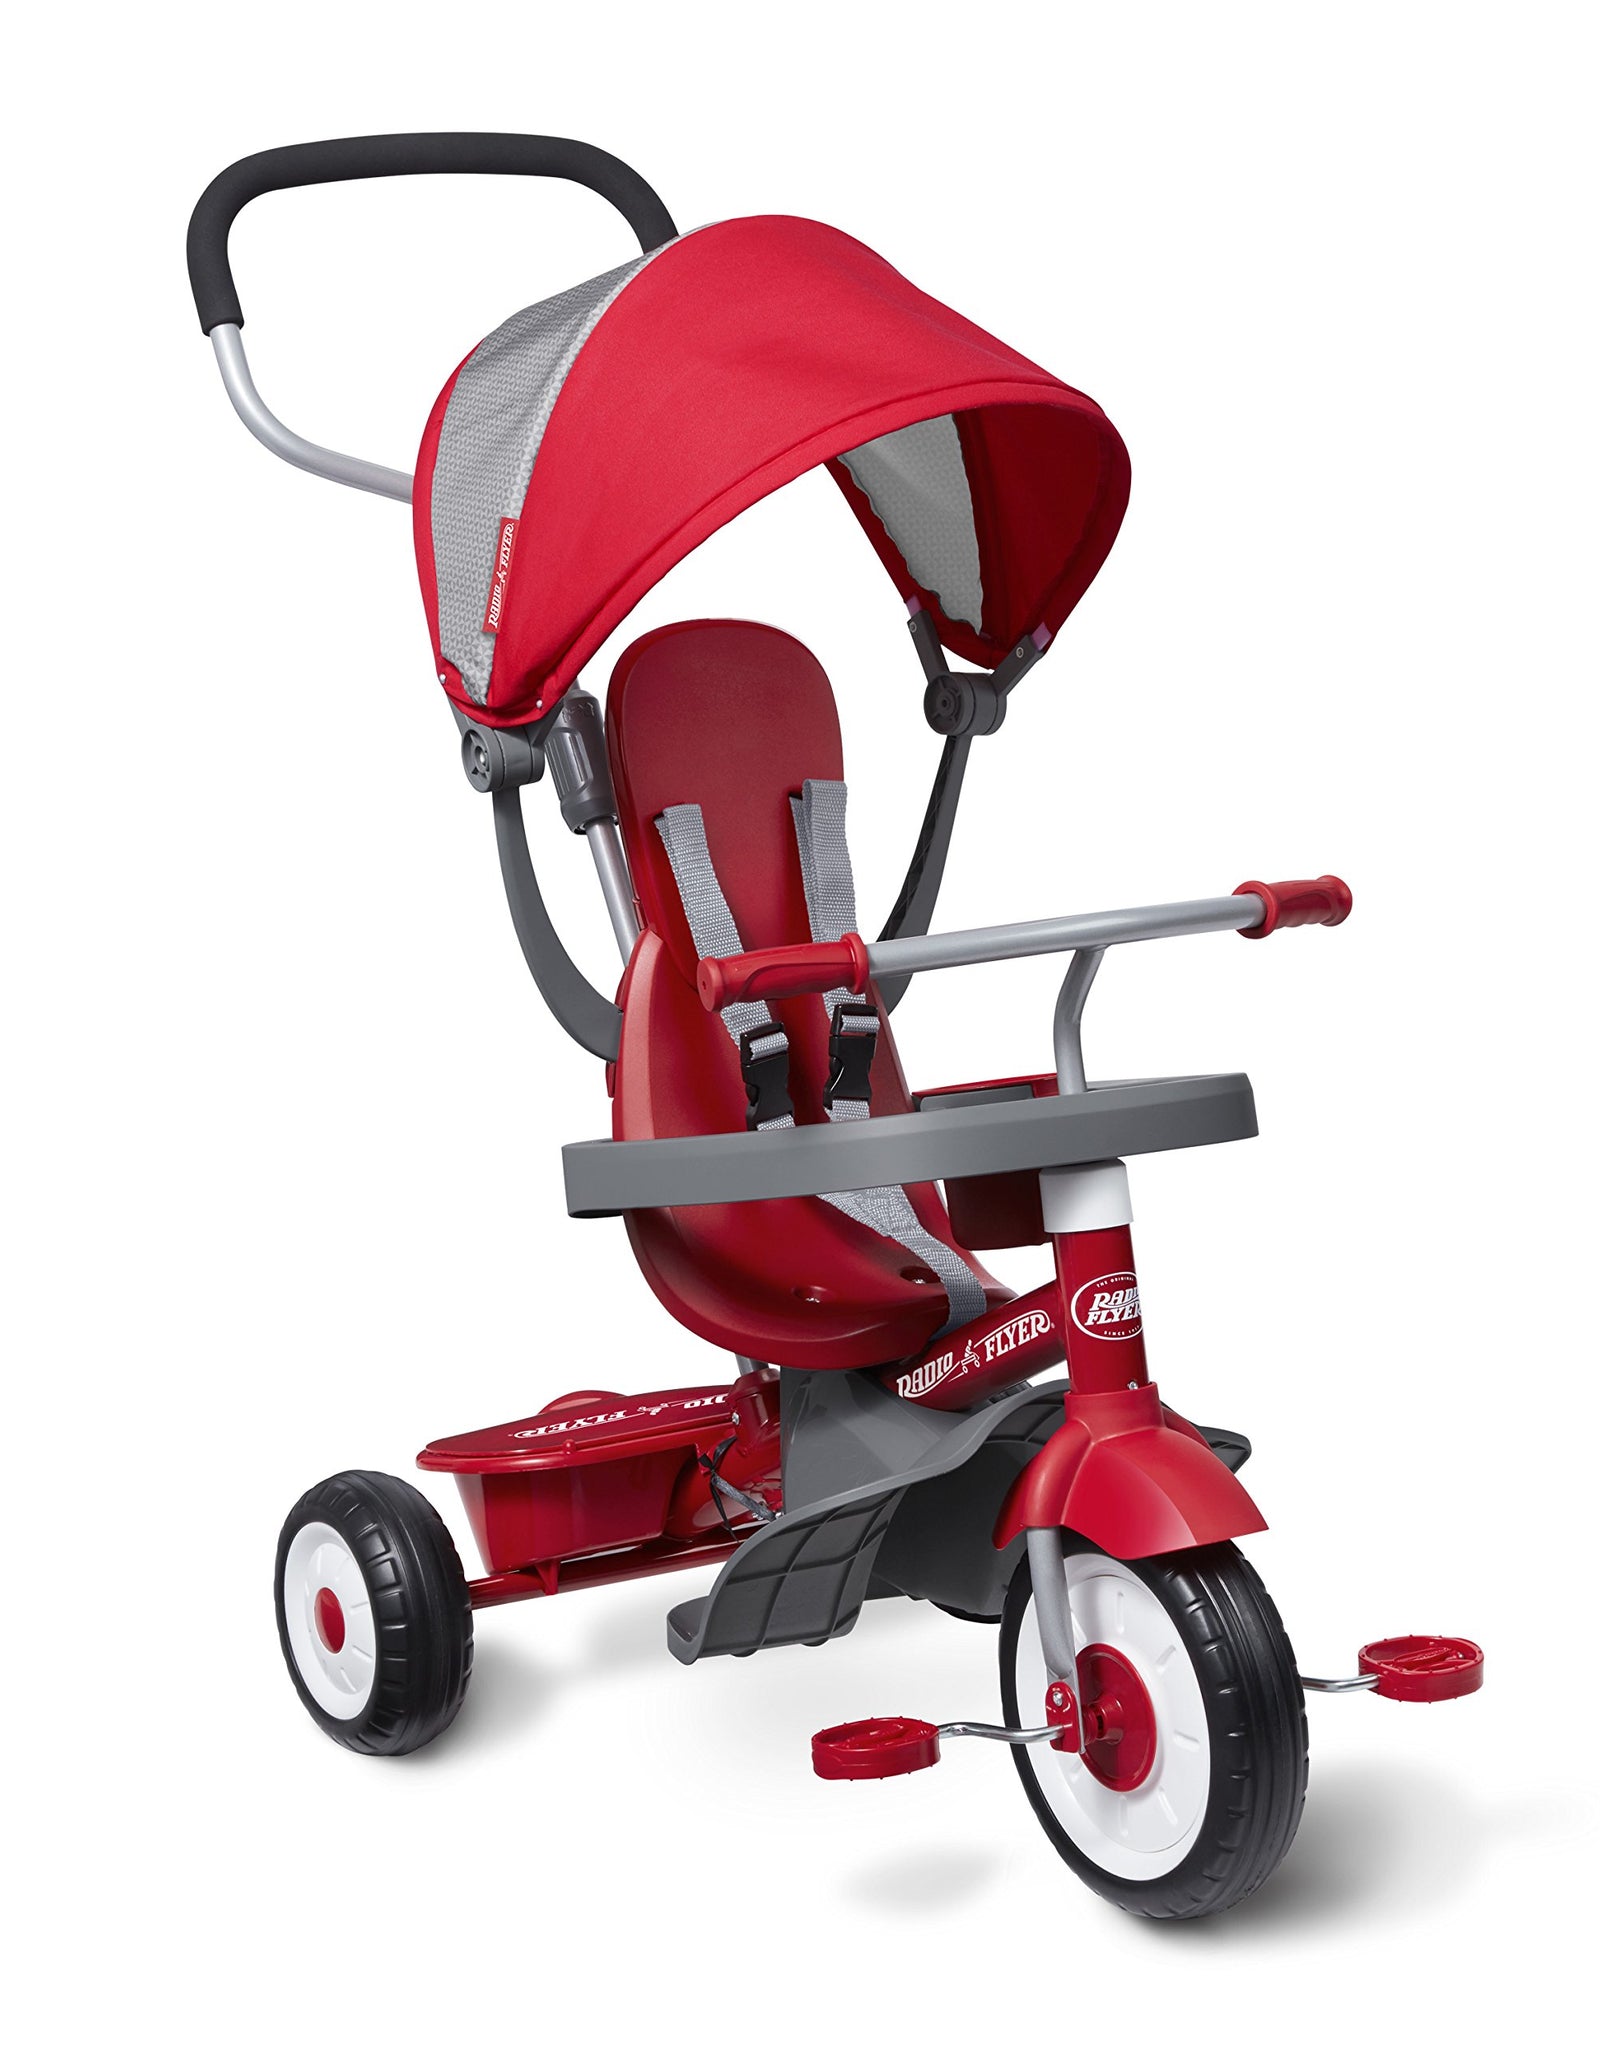 Radio Flyer 4-in-1 Stroll 'N Trike, Red Toddler Tricycle for Ages 1 Year -5 Years, 19.88" x 35.04" x 40.75"